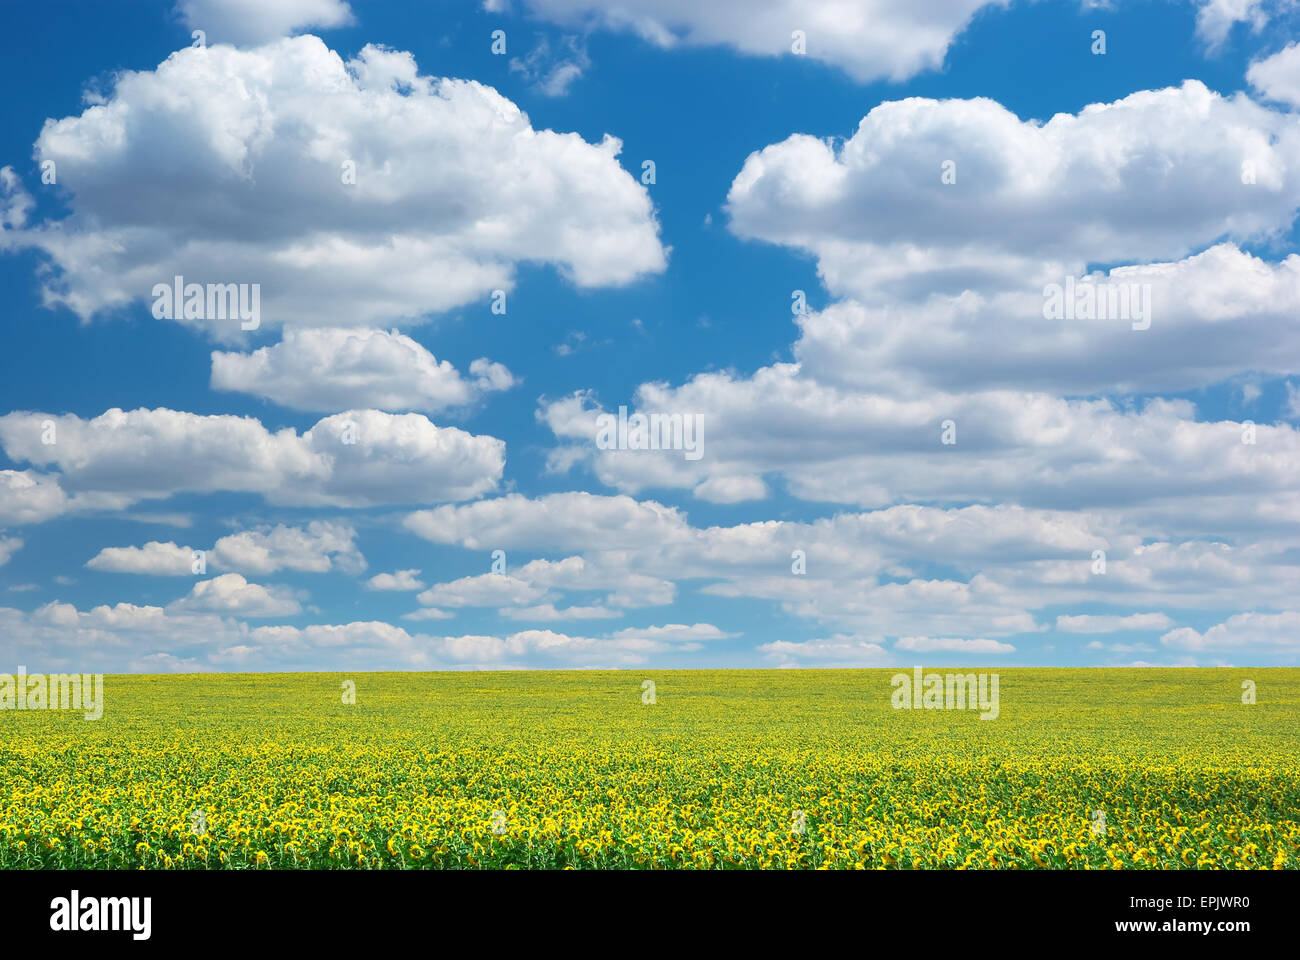 Big field of sunflowers. Composition of nature. Stock Photo